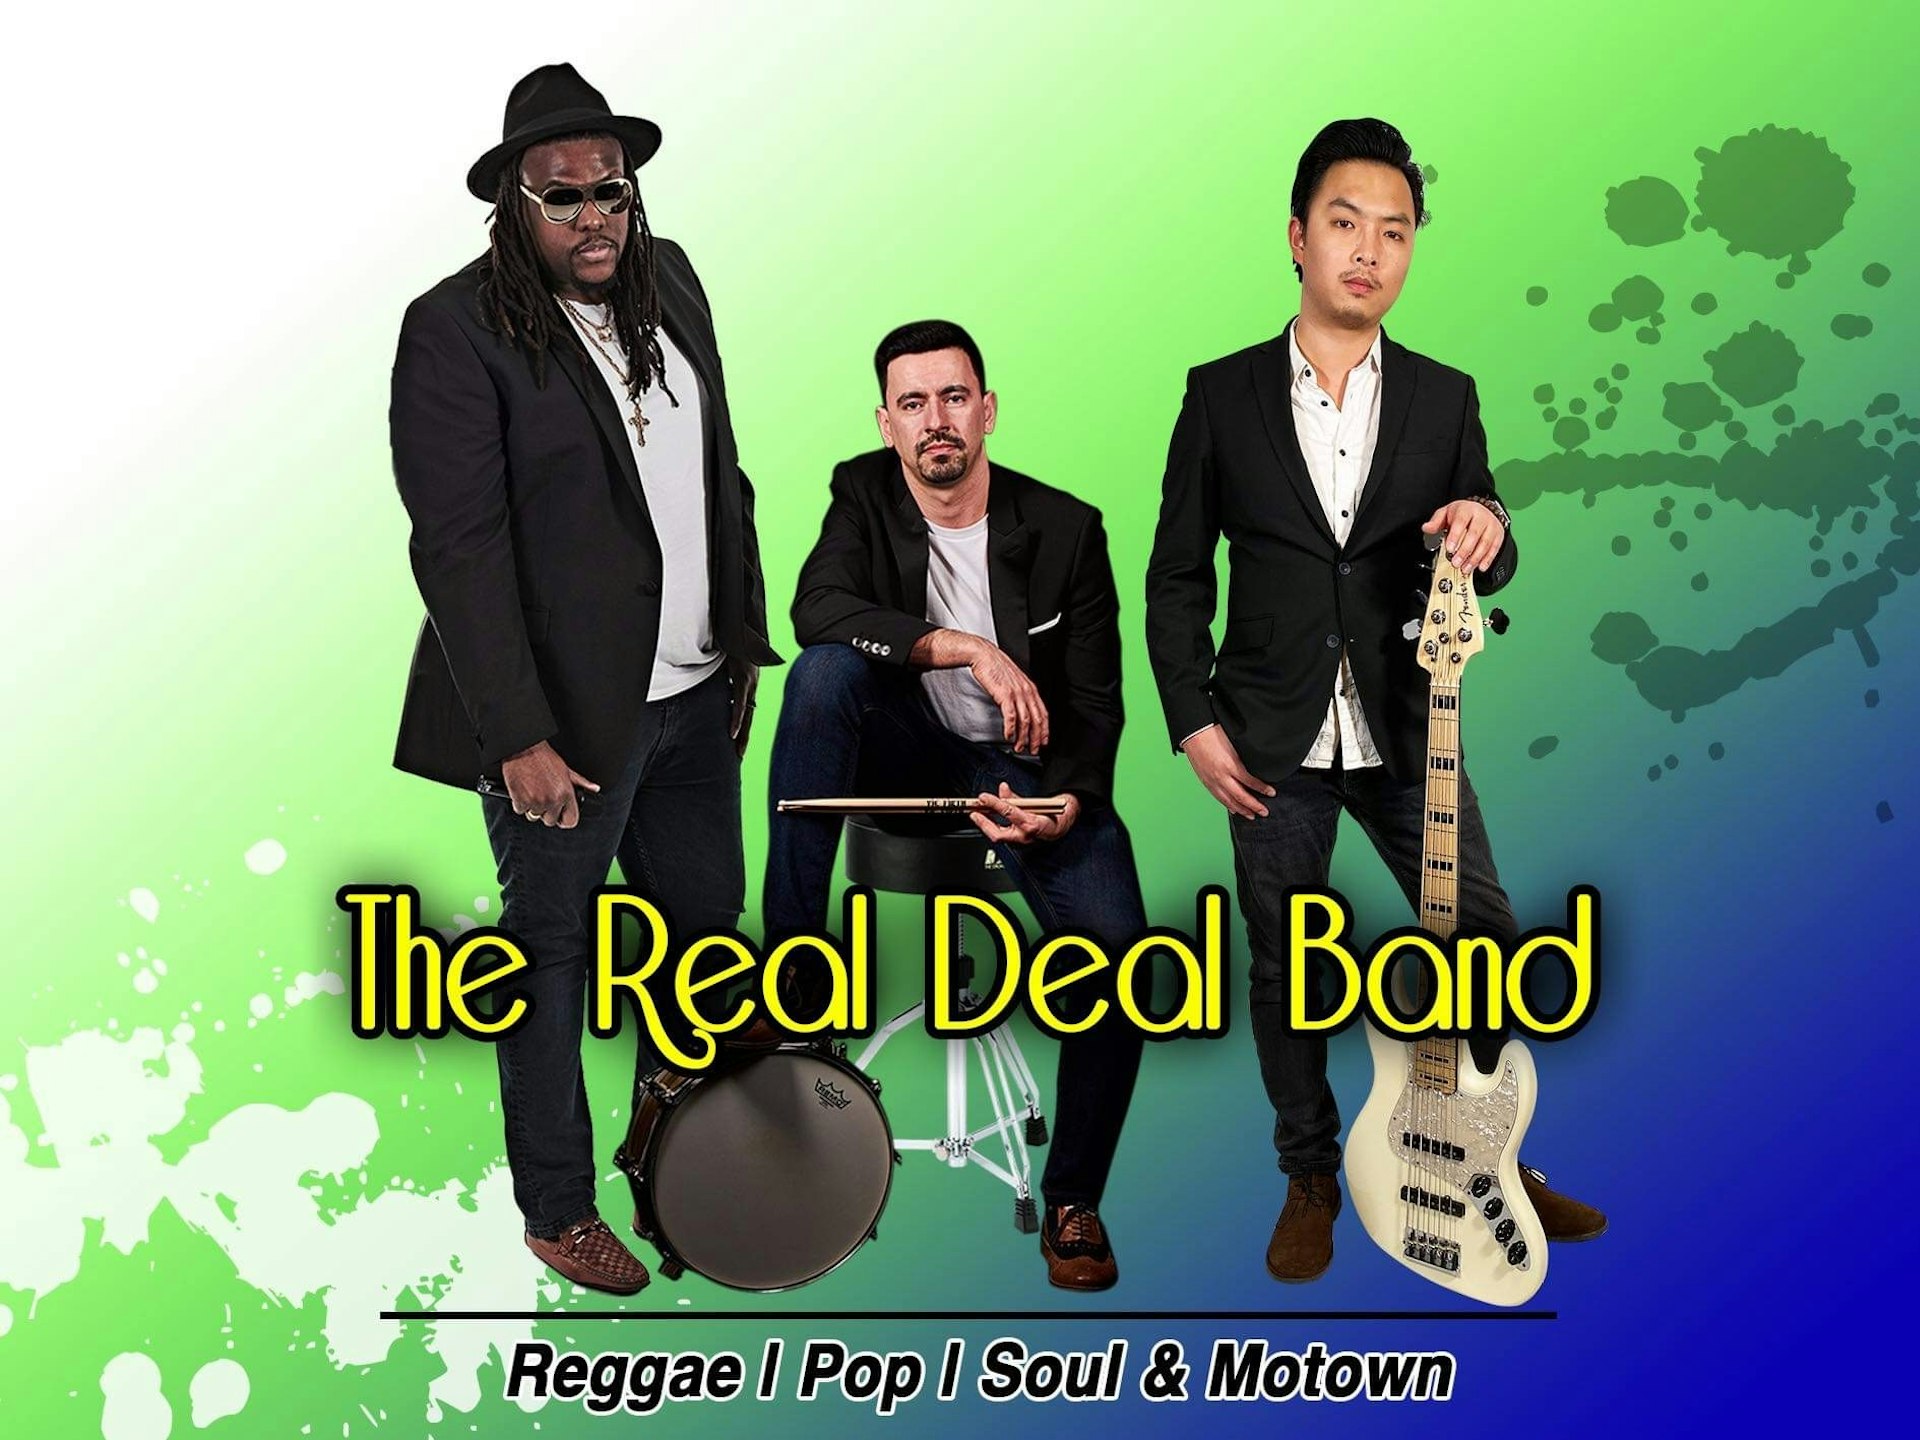 Function band, The Real Deal Band